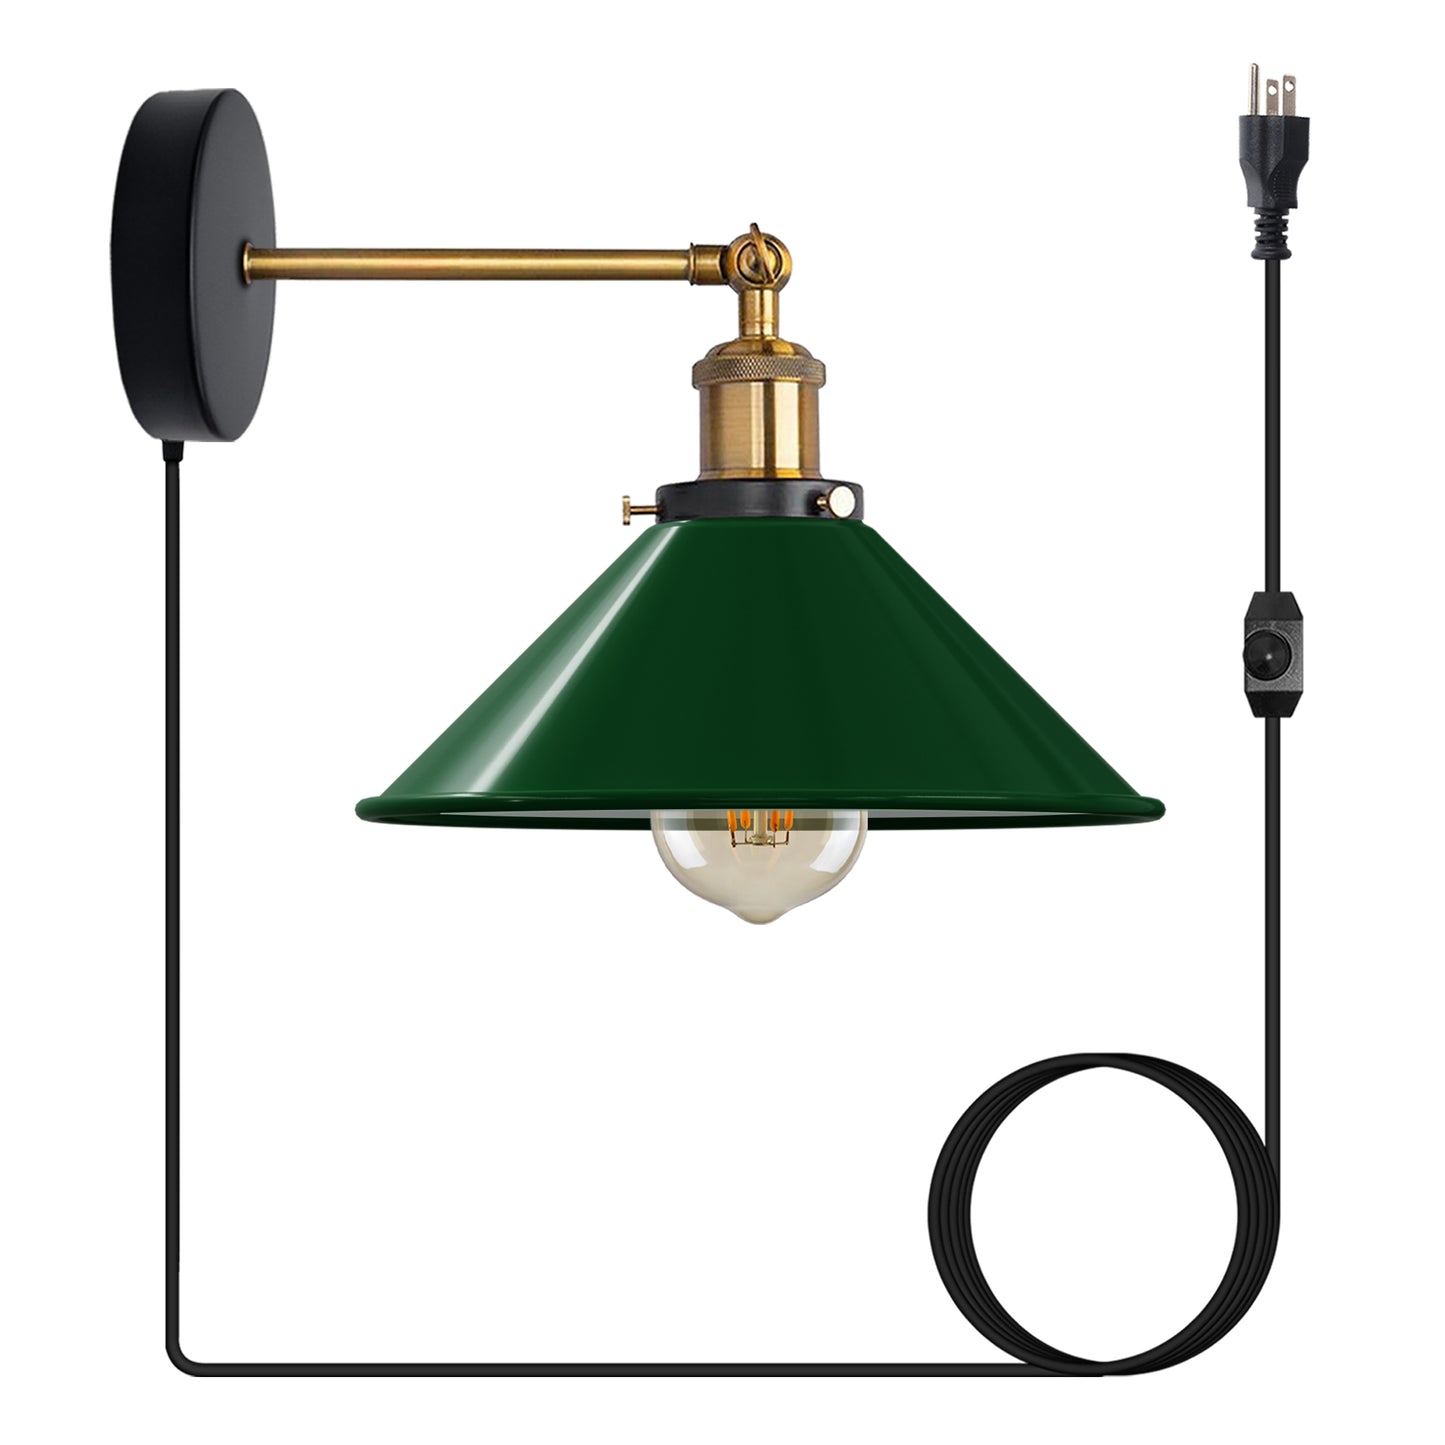 Green Plug-in Wall Light Sconces with Dimmer Switch.JPG